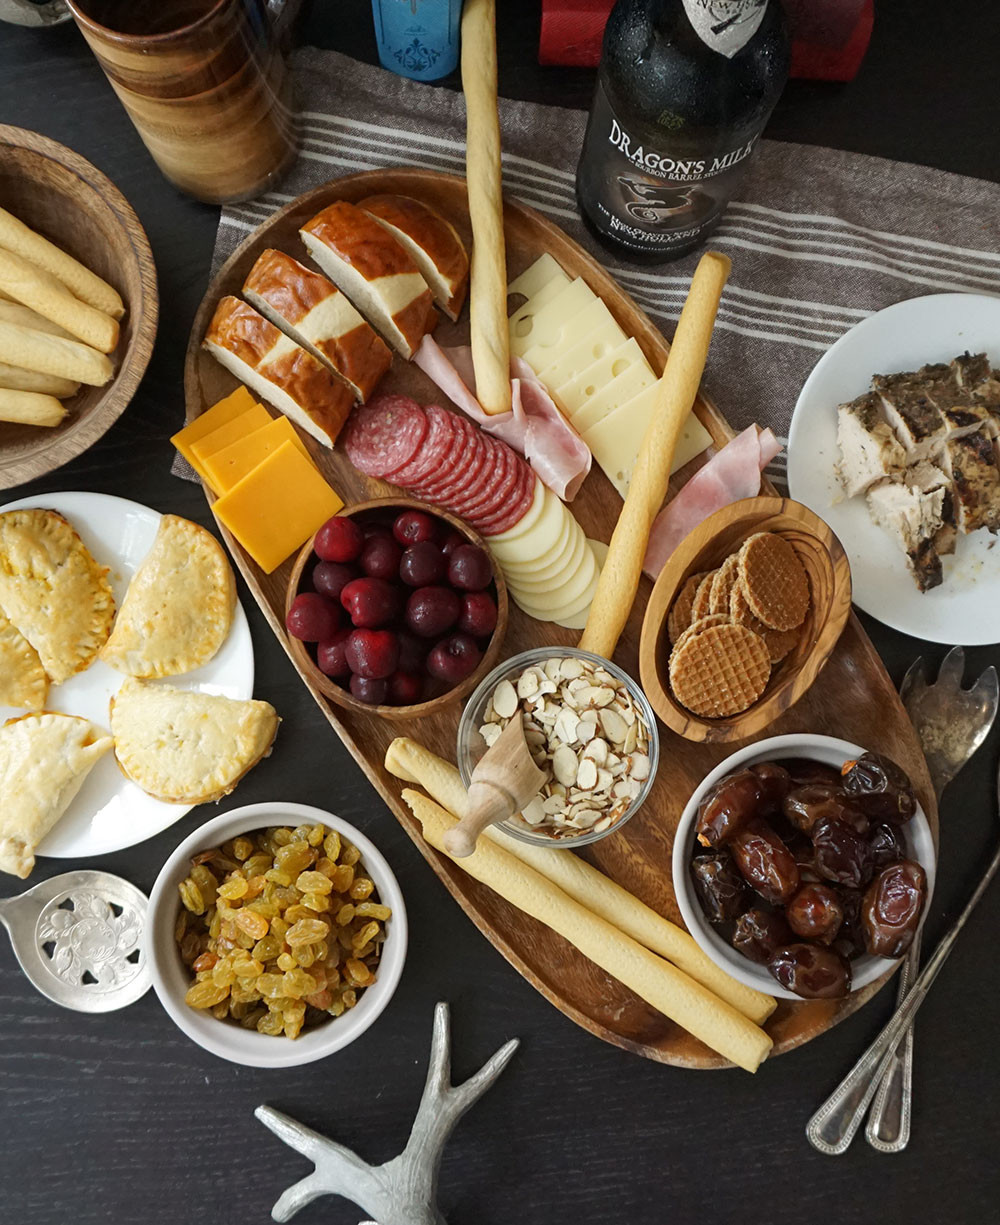 Game Of Thrones Dinner Party Ideas
 Dinner is ing A Game of Thrones menu for your premiere